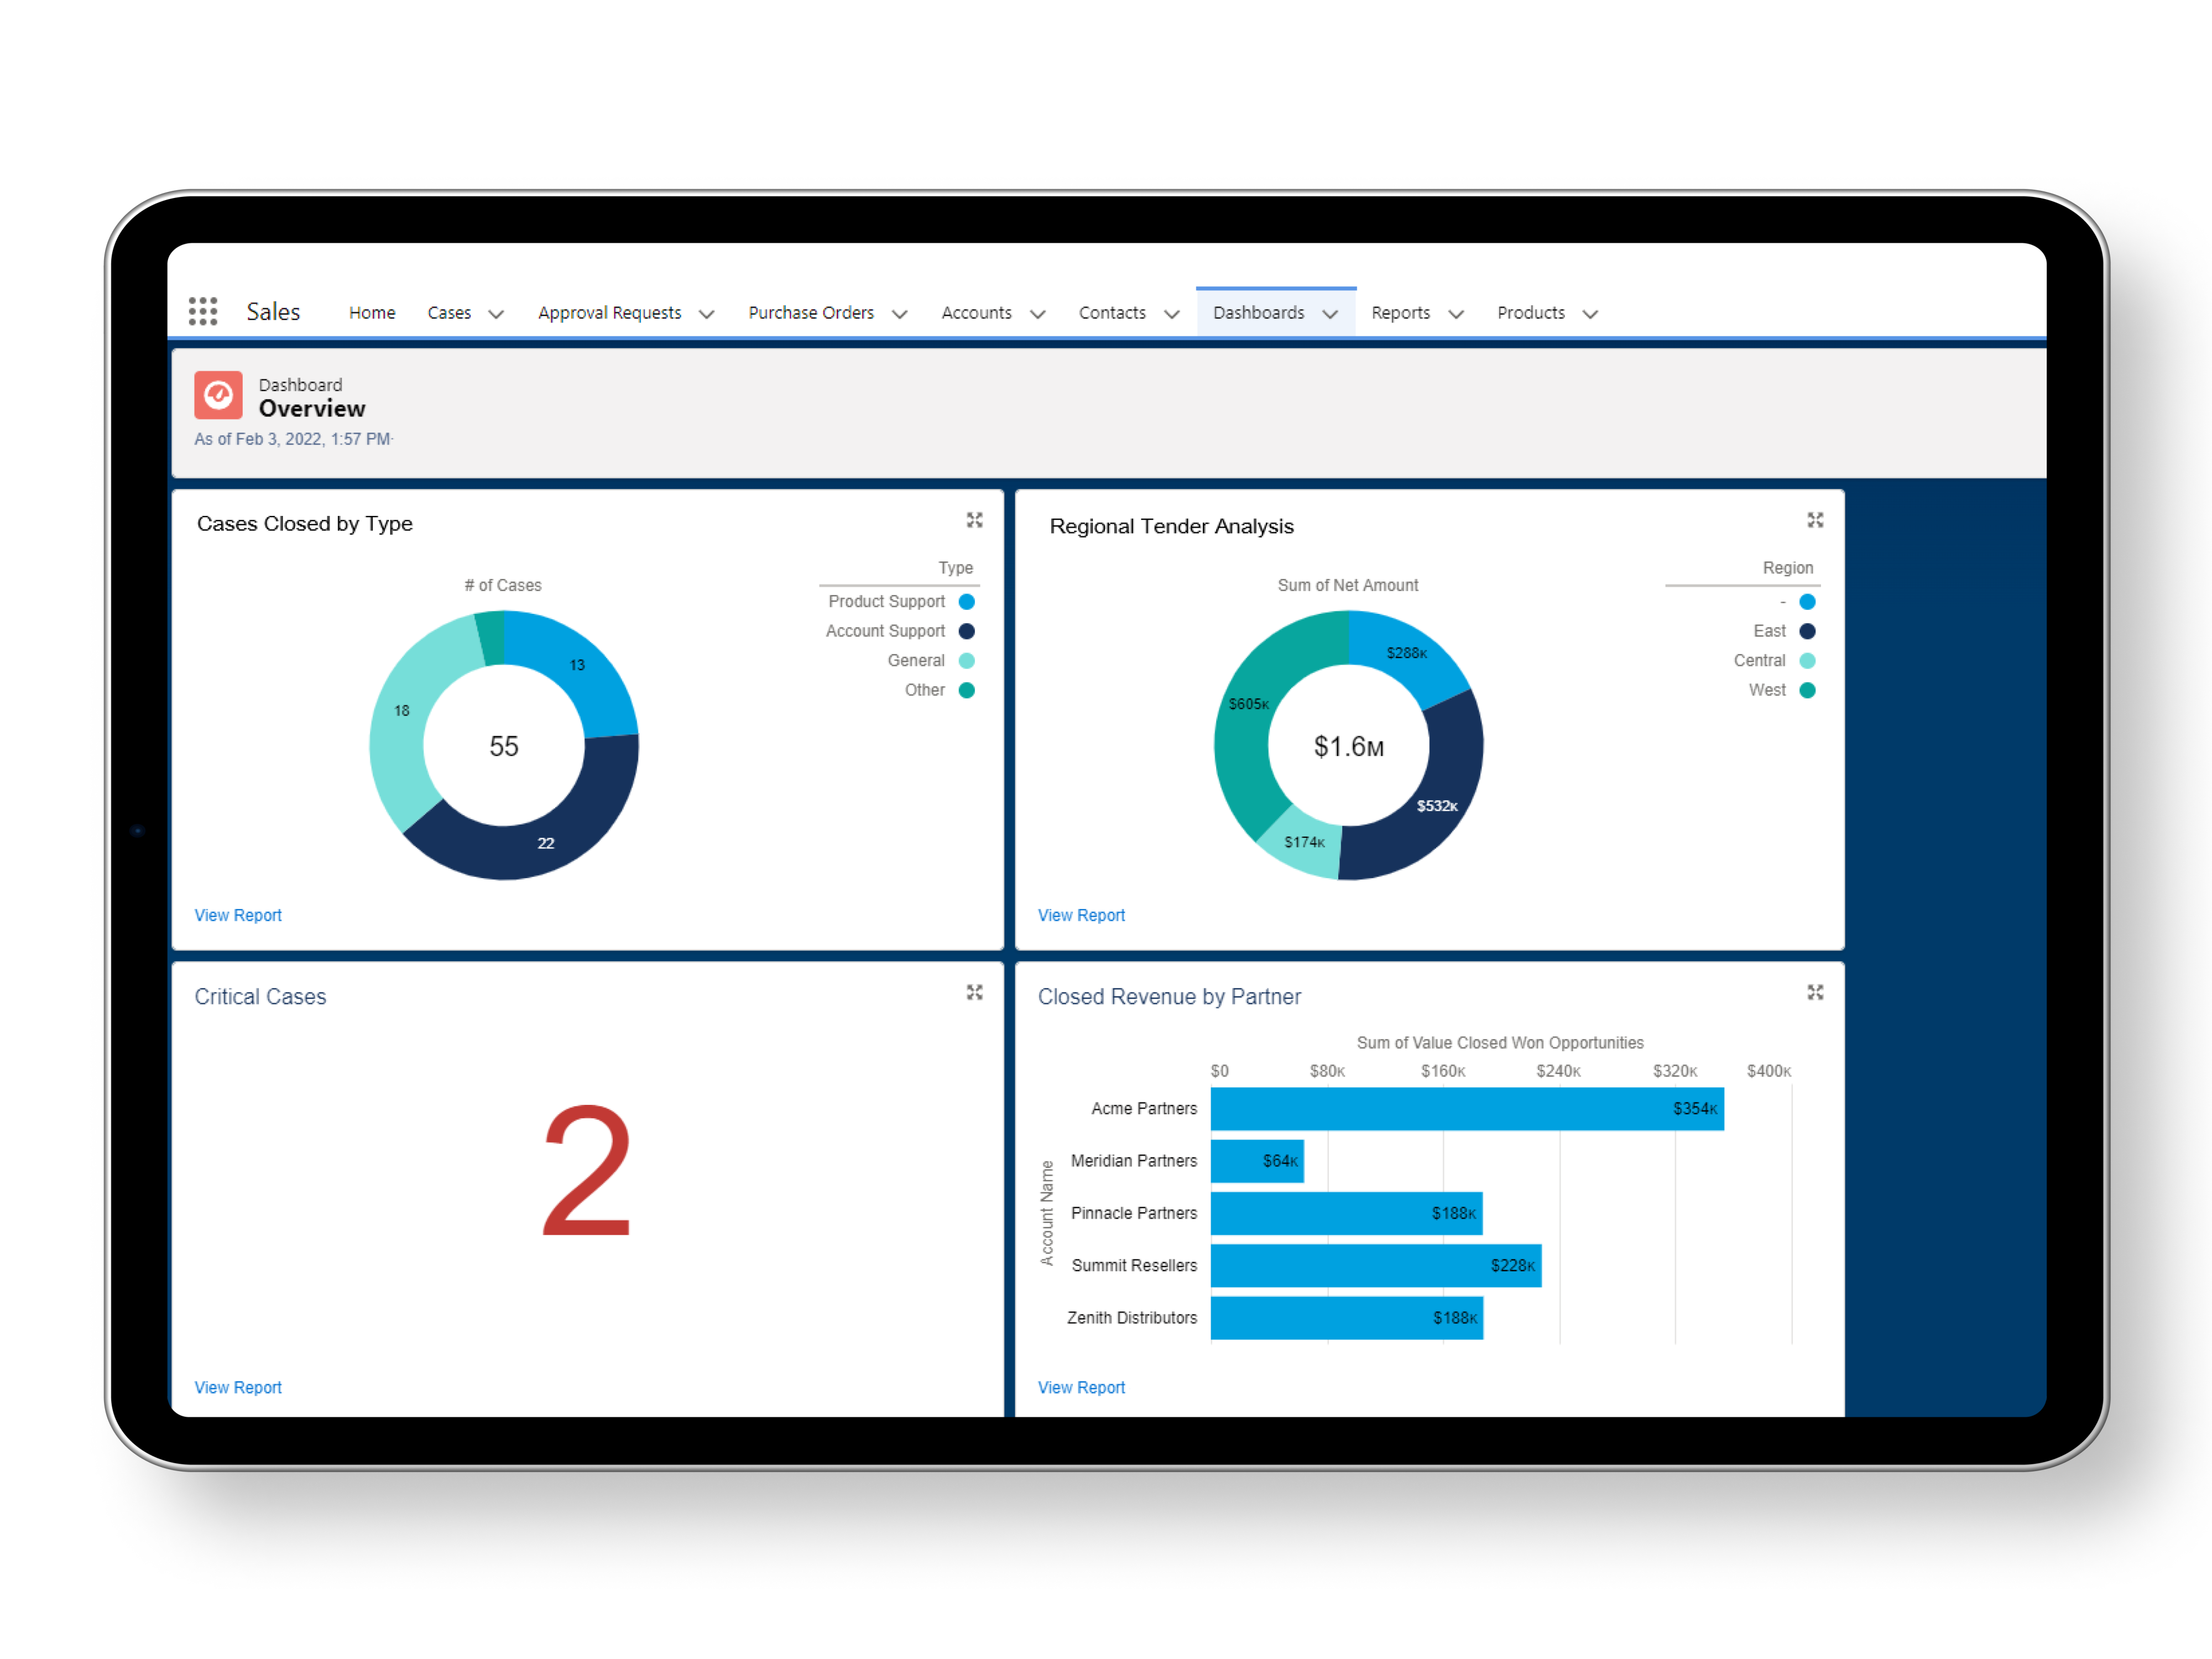 Screenshot of a dashboard on the Salesforce platform that helps visualize closed tickets, escalations, open RFPs, and revenue per partner. 